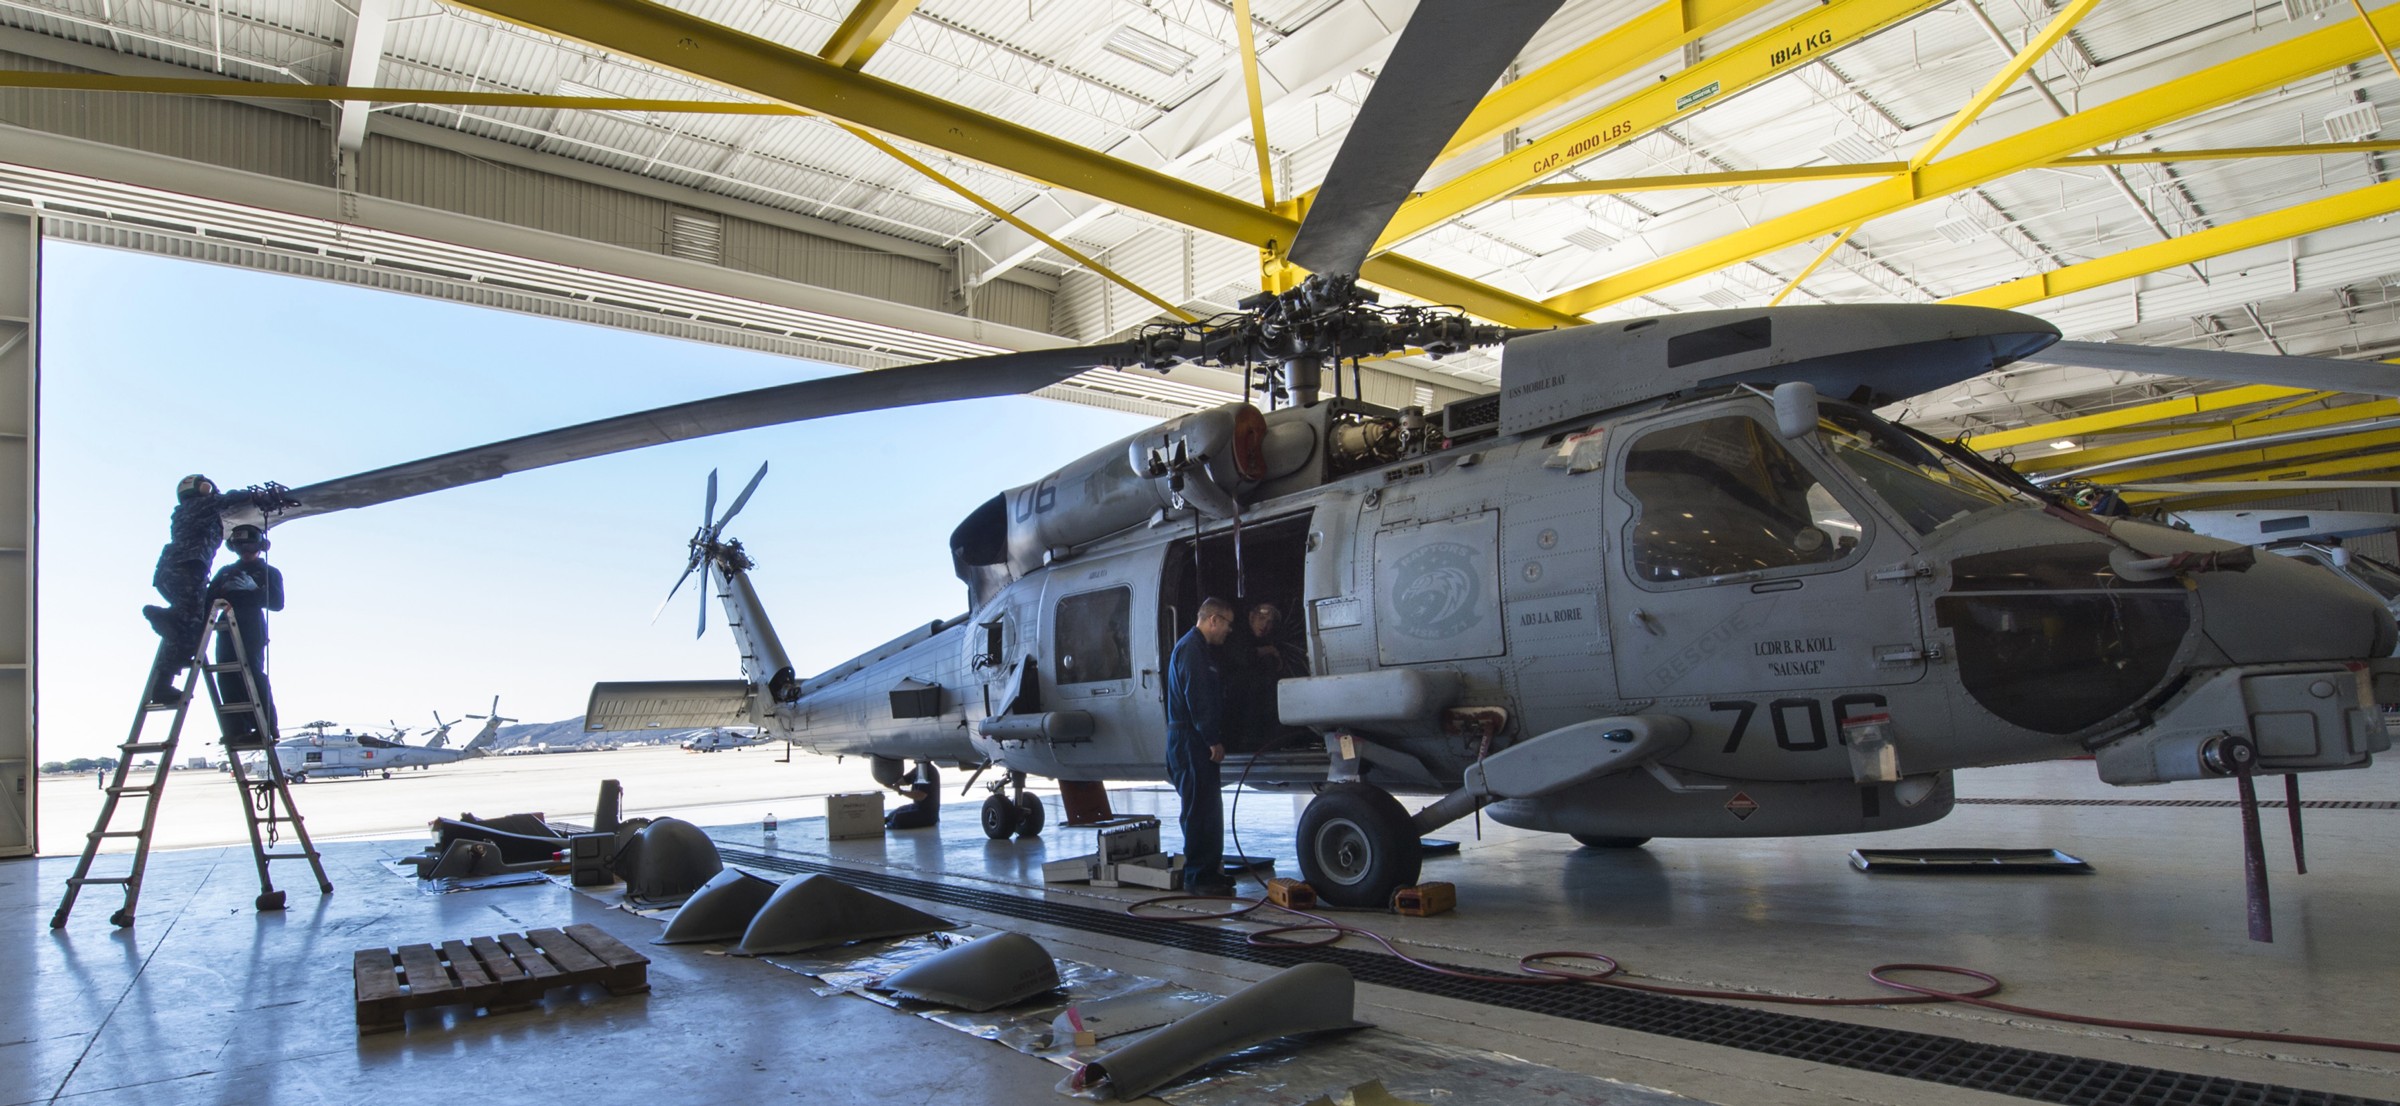 hsm-71 raptors helicopter maritime strike squadron mh-60r seahawk navy 2013 77 maintenance nas north island